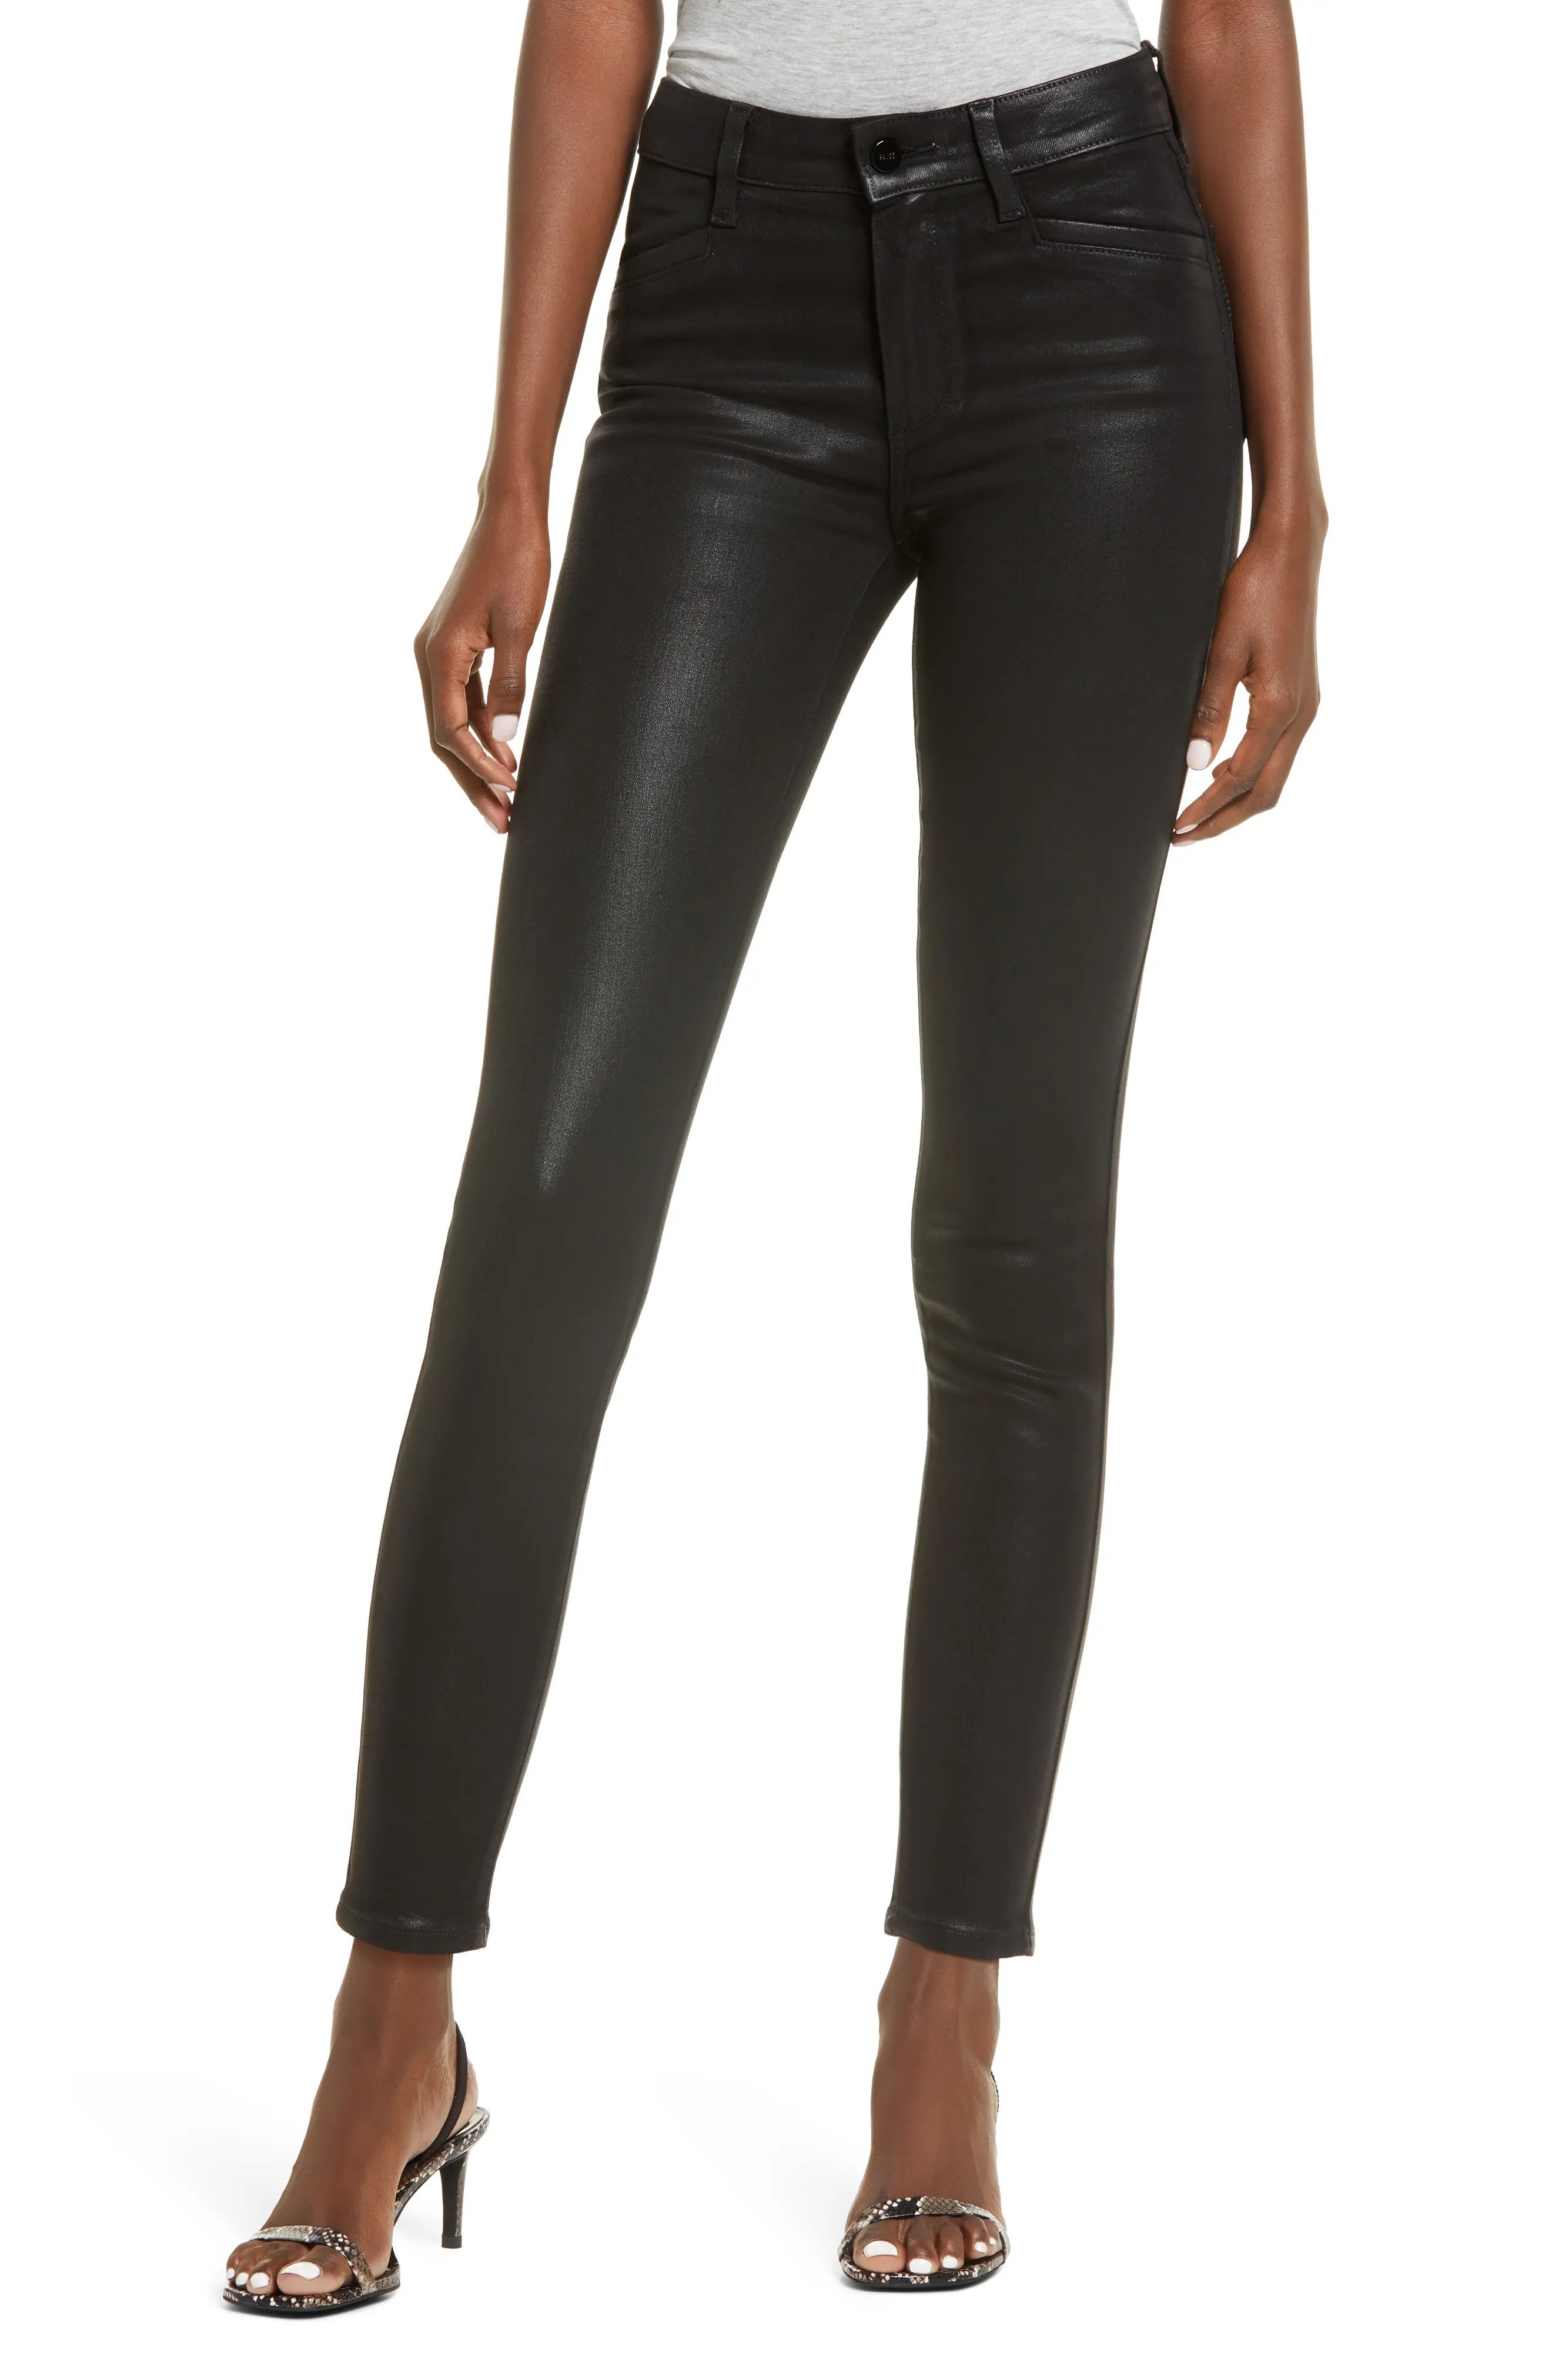 Women's Paige Hoxton High Waist Ankle Skinny Jeans, Size 27 - Black | Nordstrom